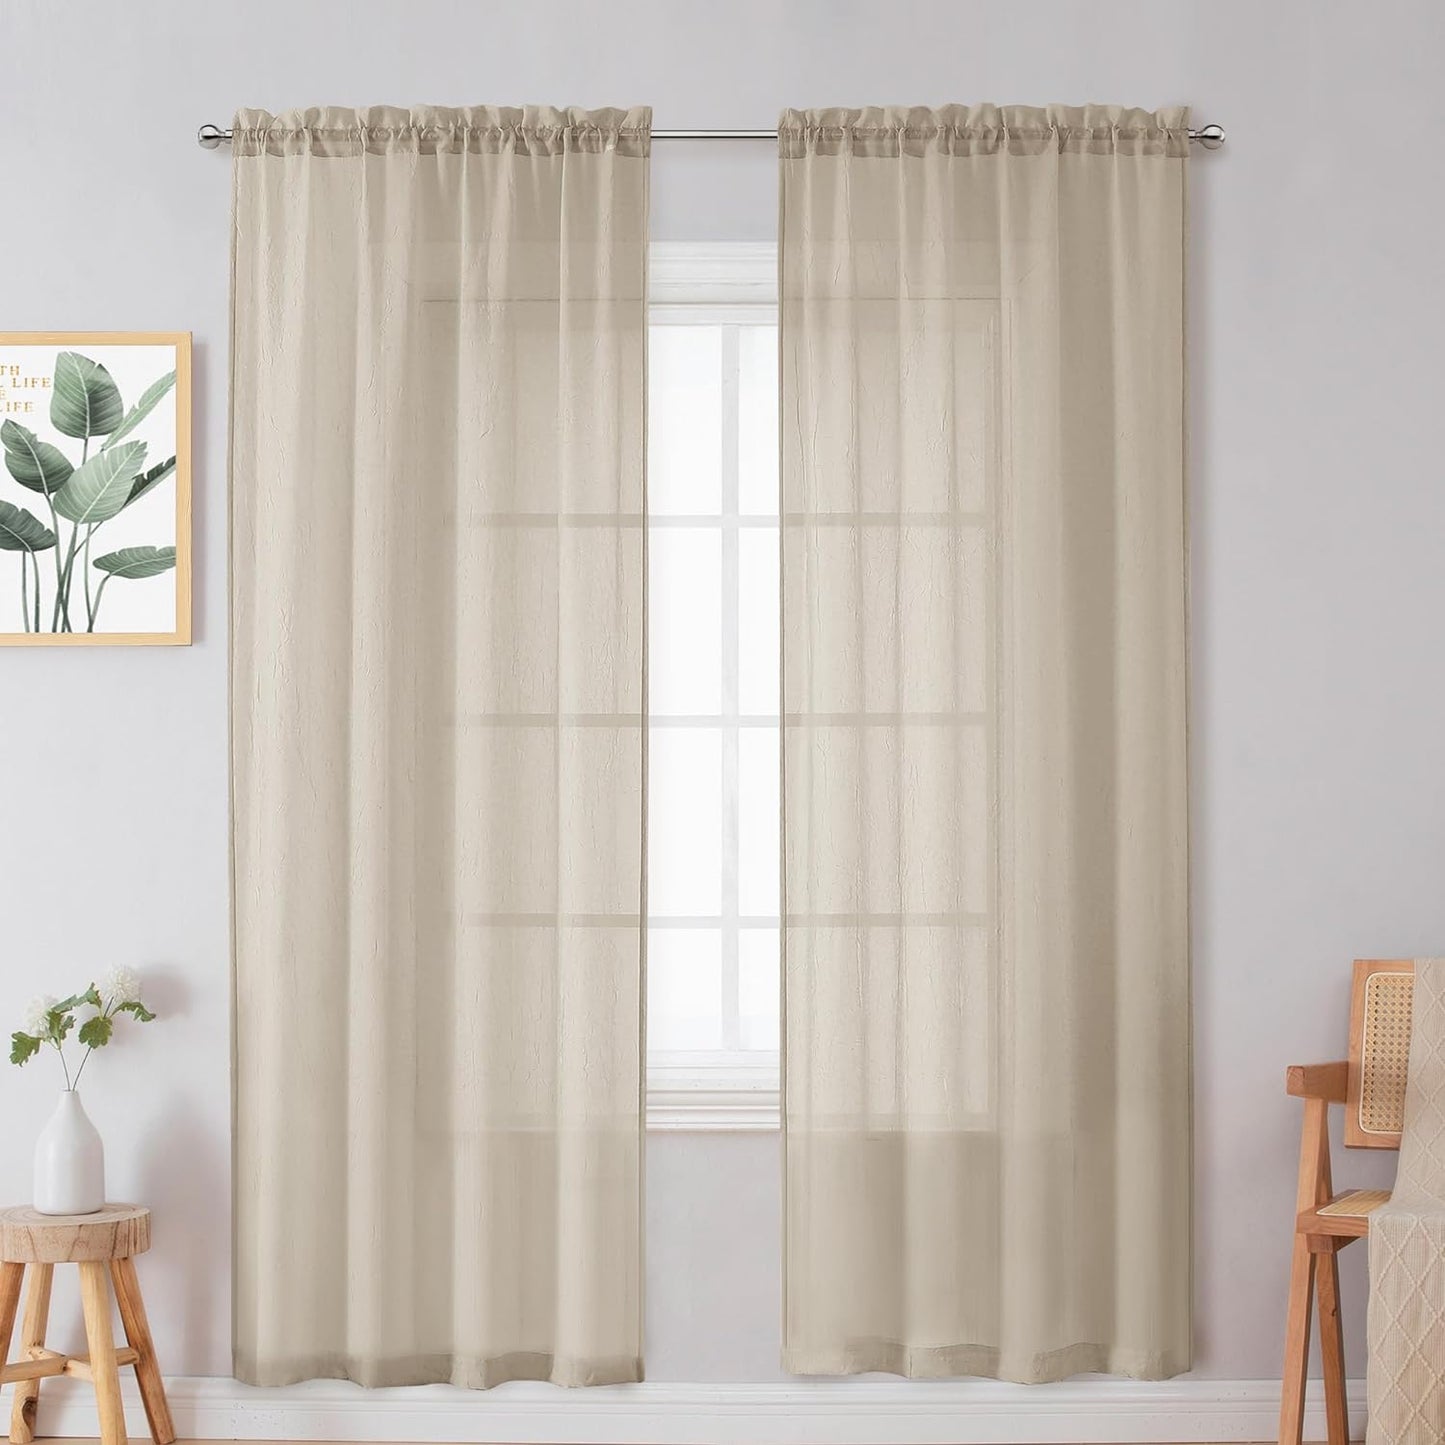 Crushed Sheer White Curtains 63 Inch Length 2 Panels, Light Filtering Solid Crinkle Voile Short Sheer Curtian for Bedroom Living Room, Each 42Wx63L Inches  Chyhomenyc Taupe 42 W X 72 L 